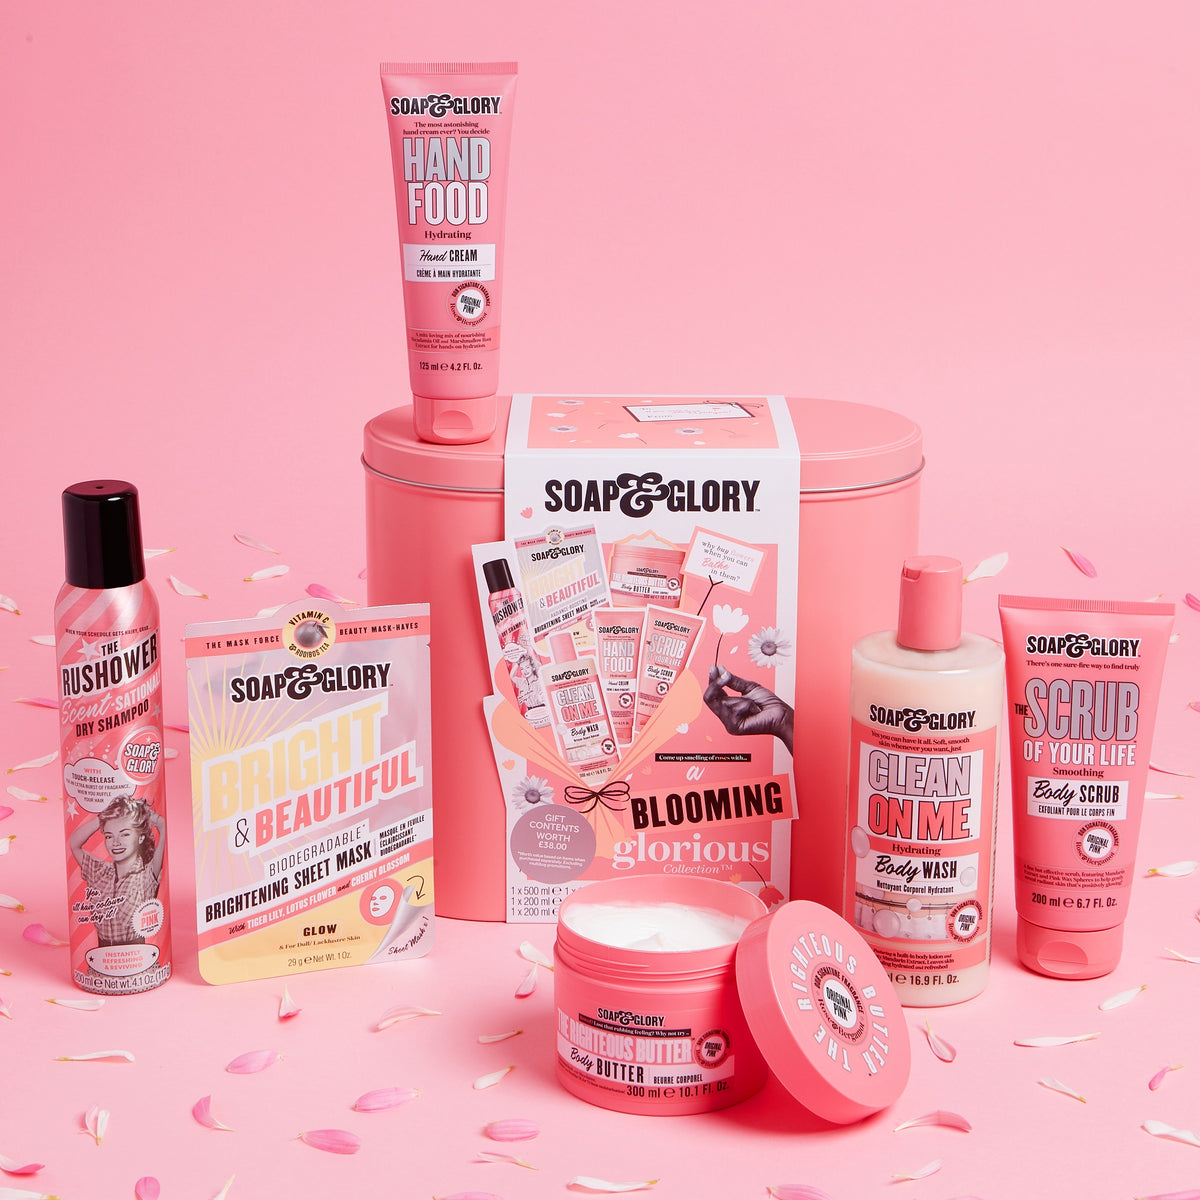 Soap & Glory - A Blooming Glorious Gift Set